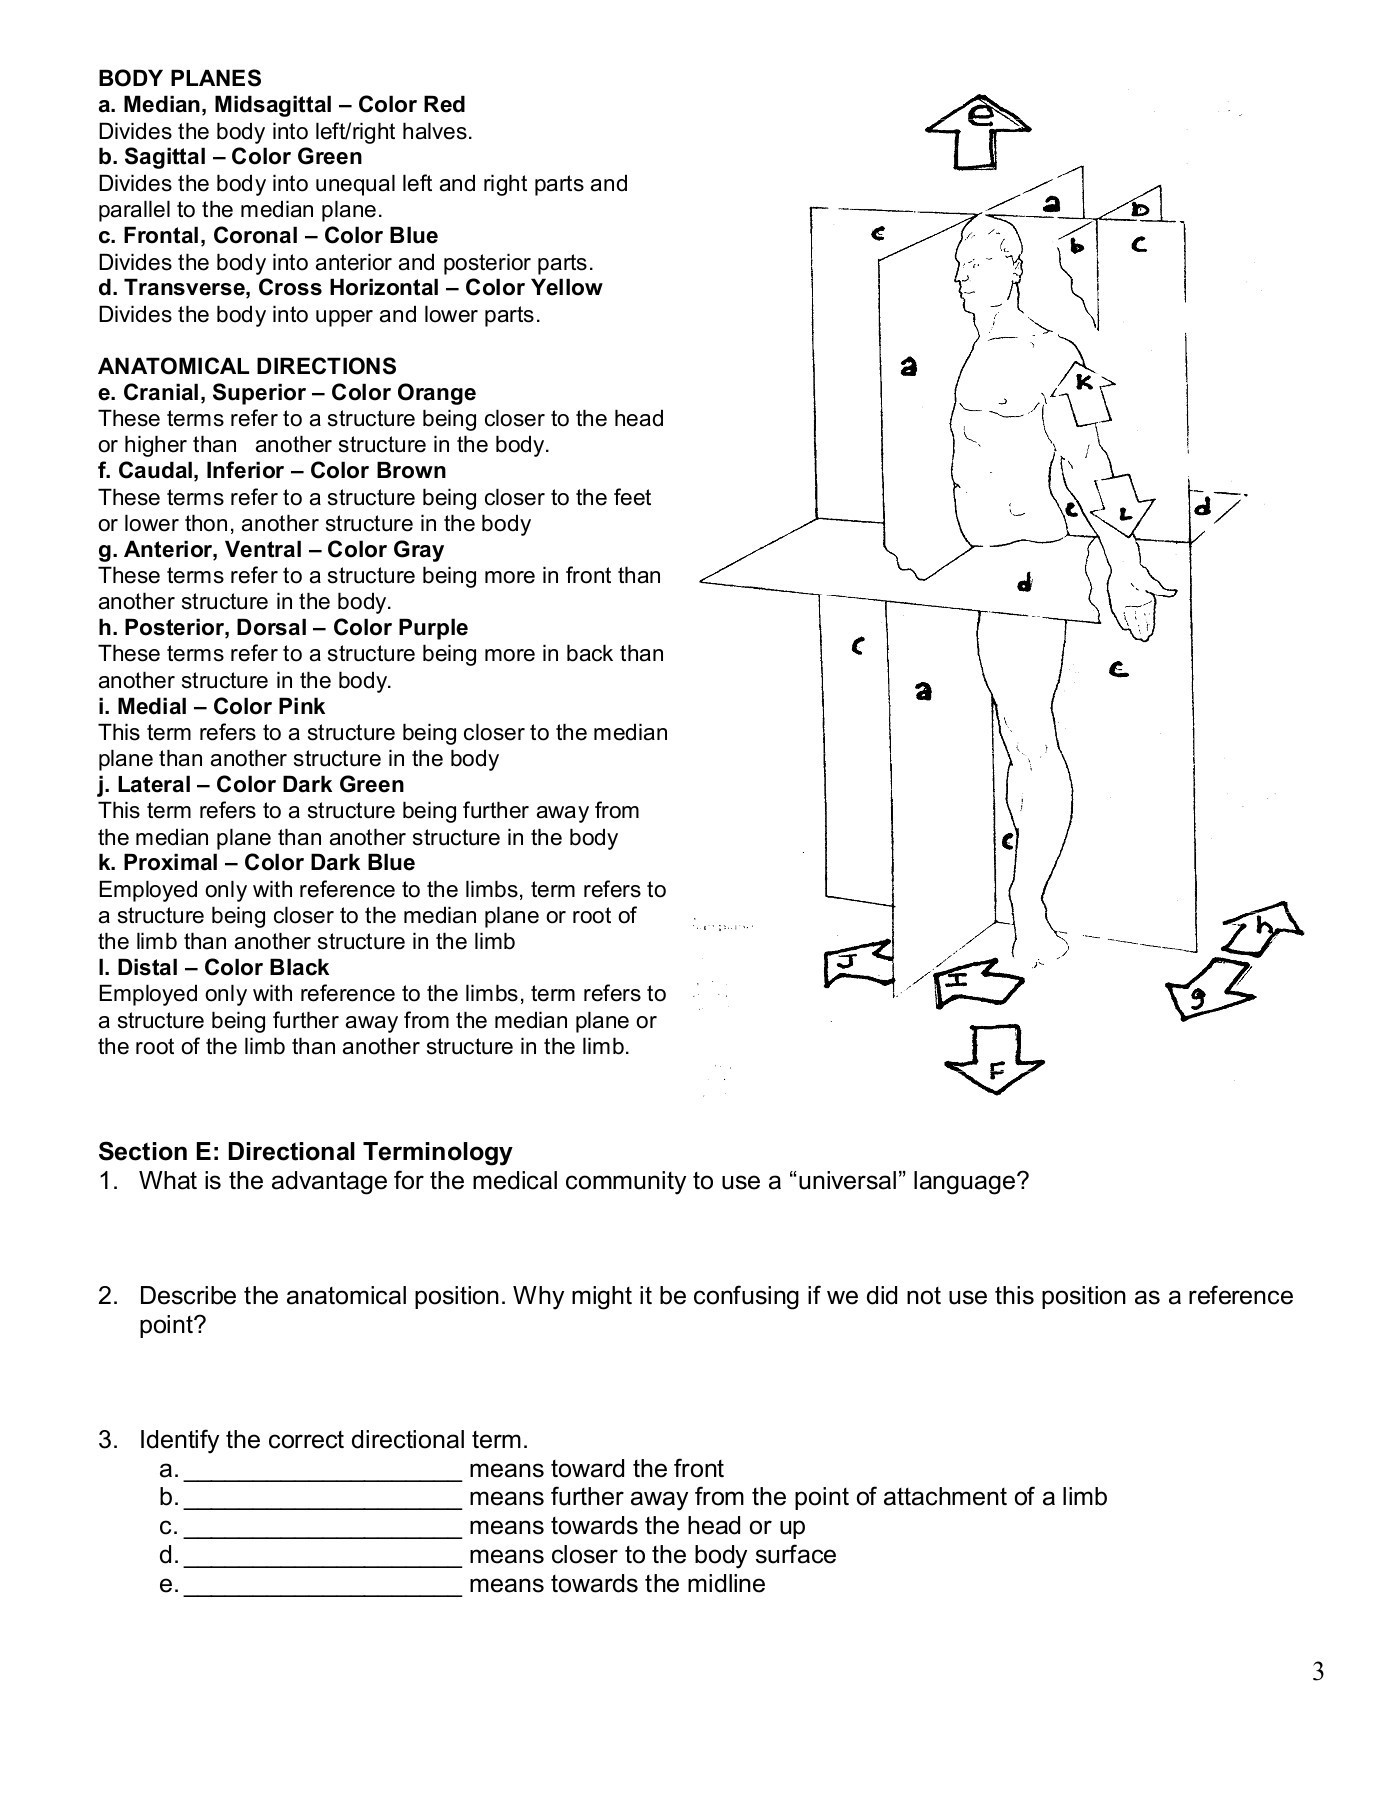 Anatomical Terms Worksheet Answers Introduction &amp; Terminology Worksheet Pages 1 6 Text